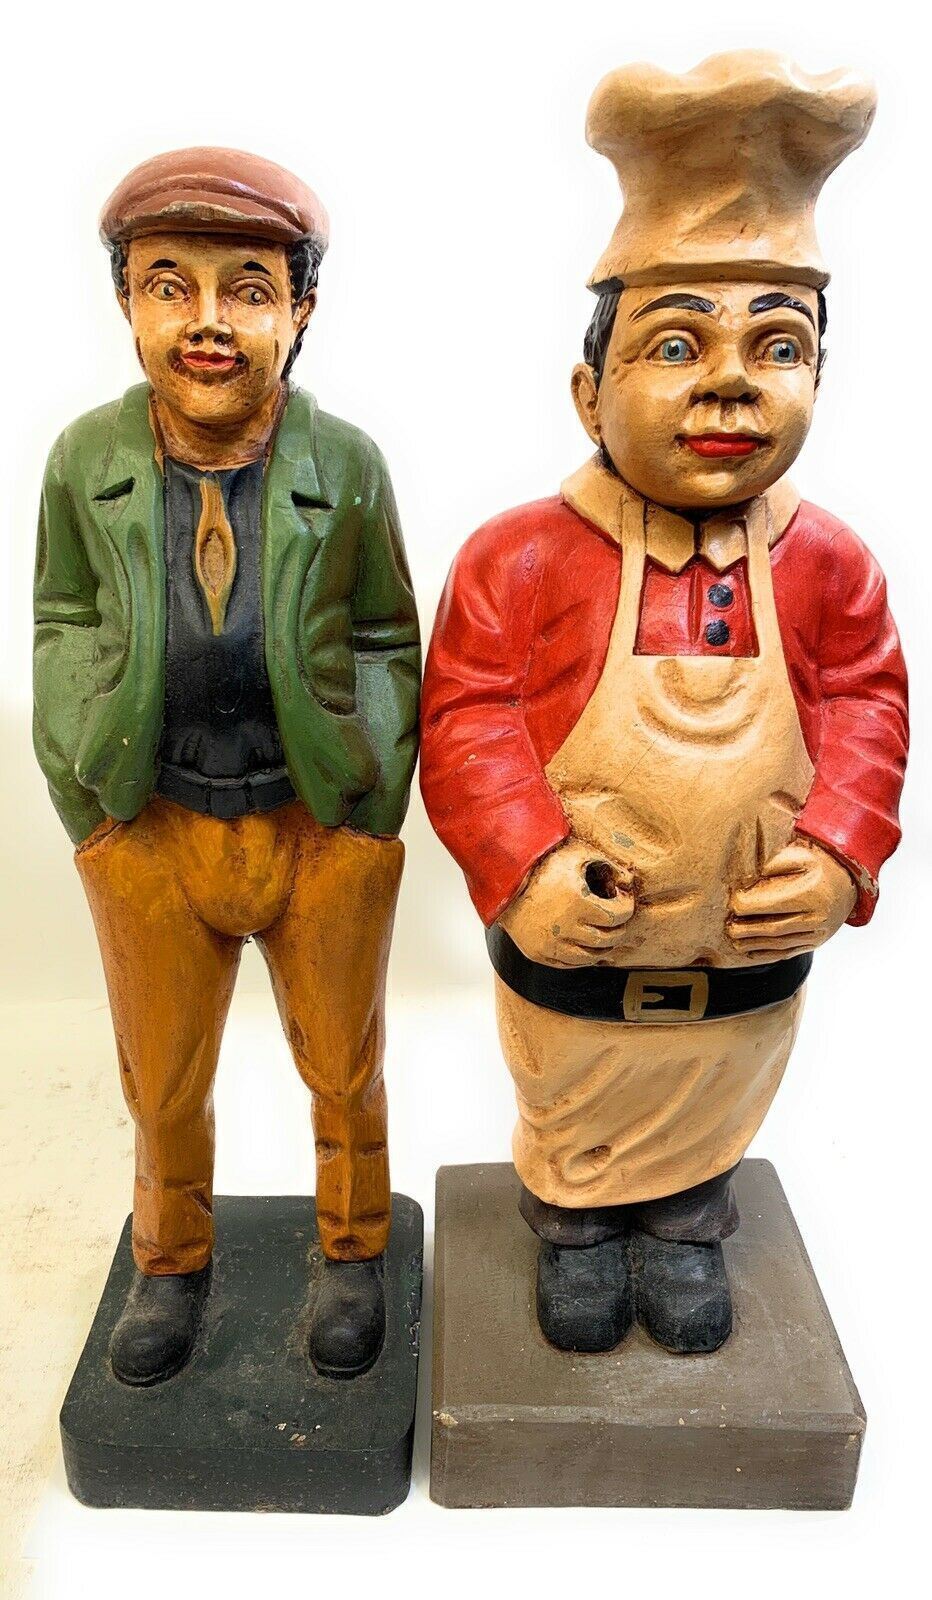 Vintage Carved Wooden Sculptures - Hand Painted & Unmarked - Chef & Business Man